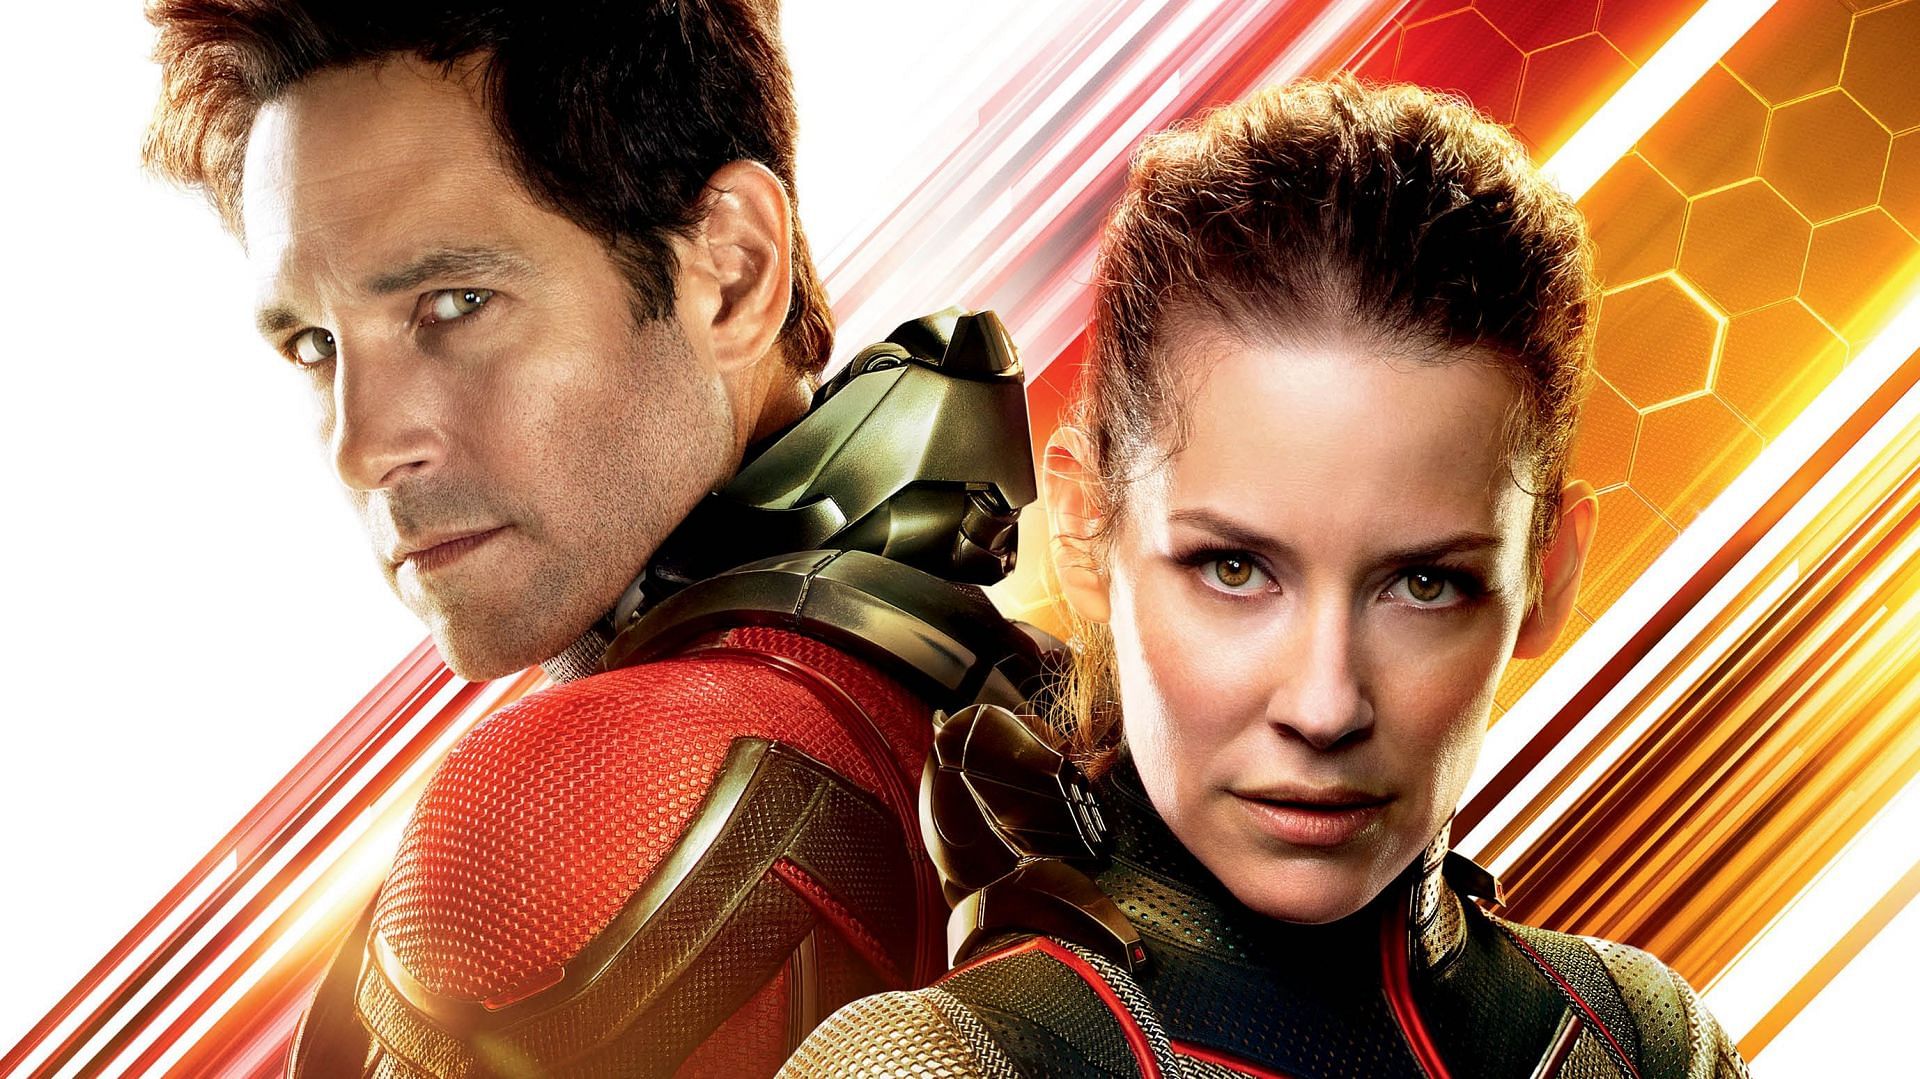 Ant-Man and The Wasp have one of the strangest courtships in the Marvel Cinematic Universe. (Image via Marvel)